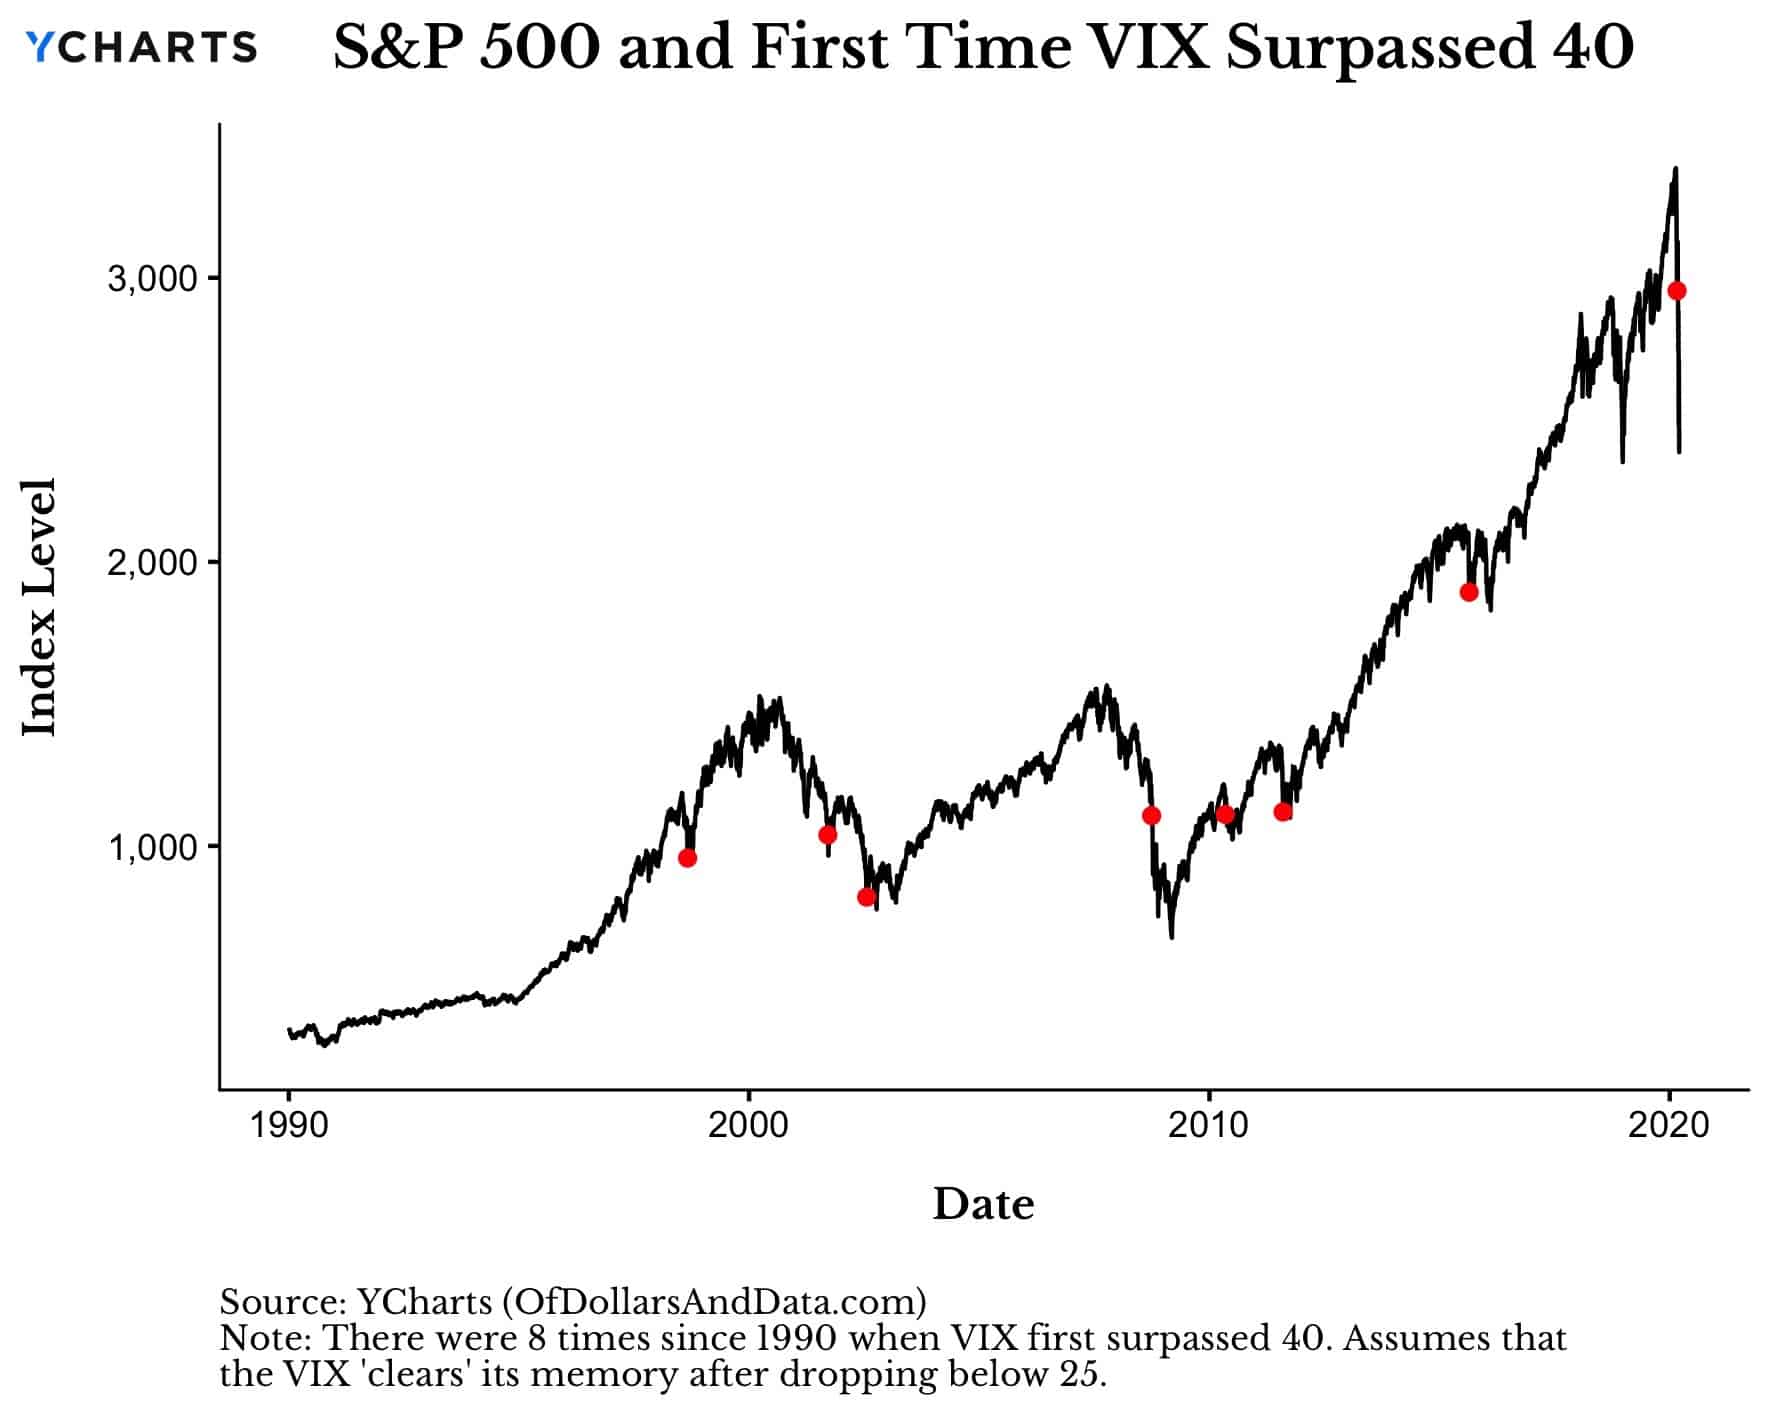 S&P 500 and every time the VIX first surpassed 40.